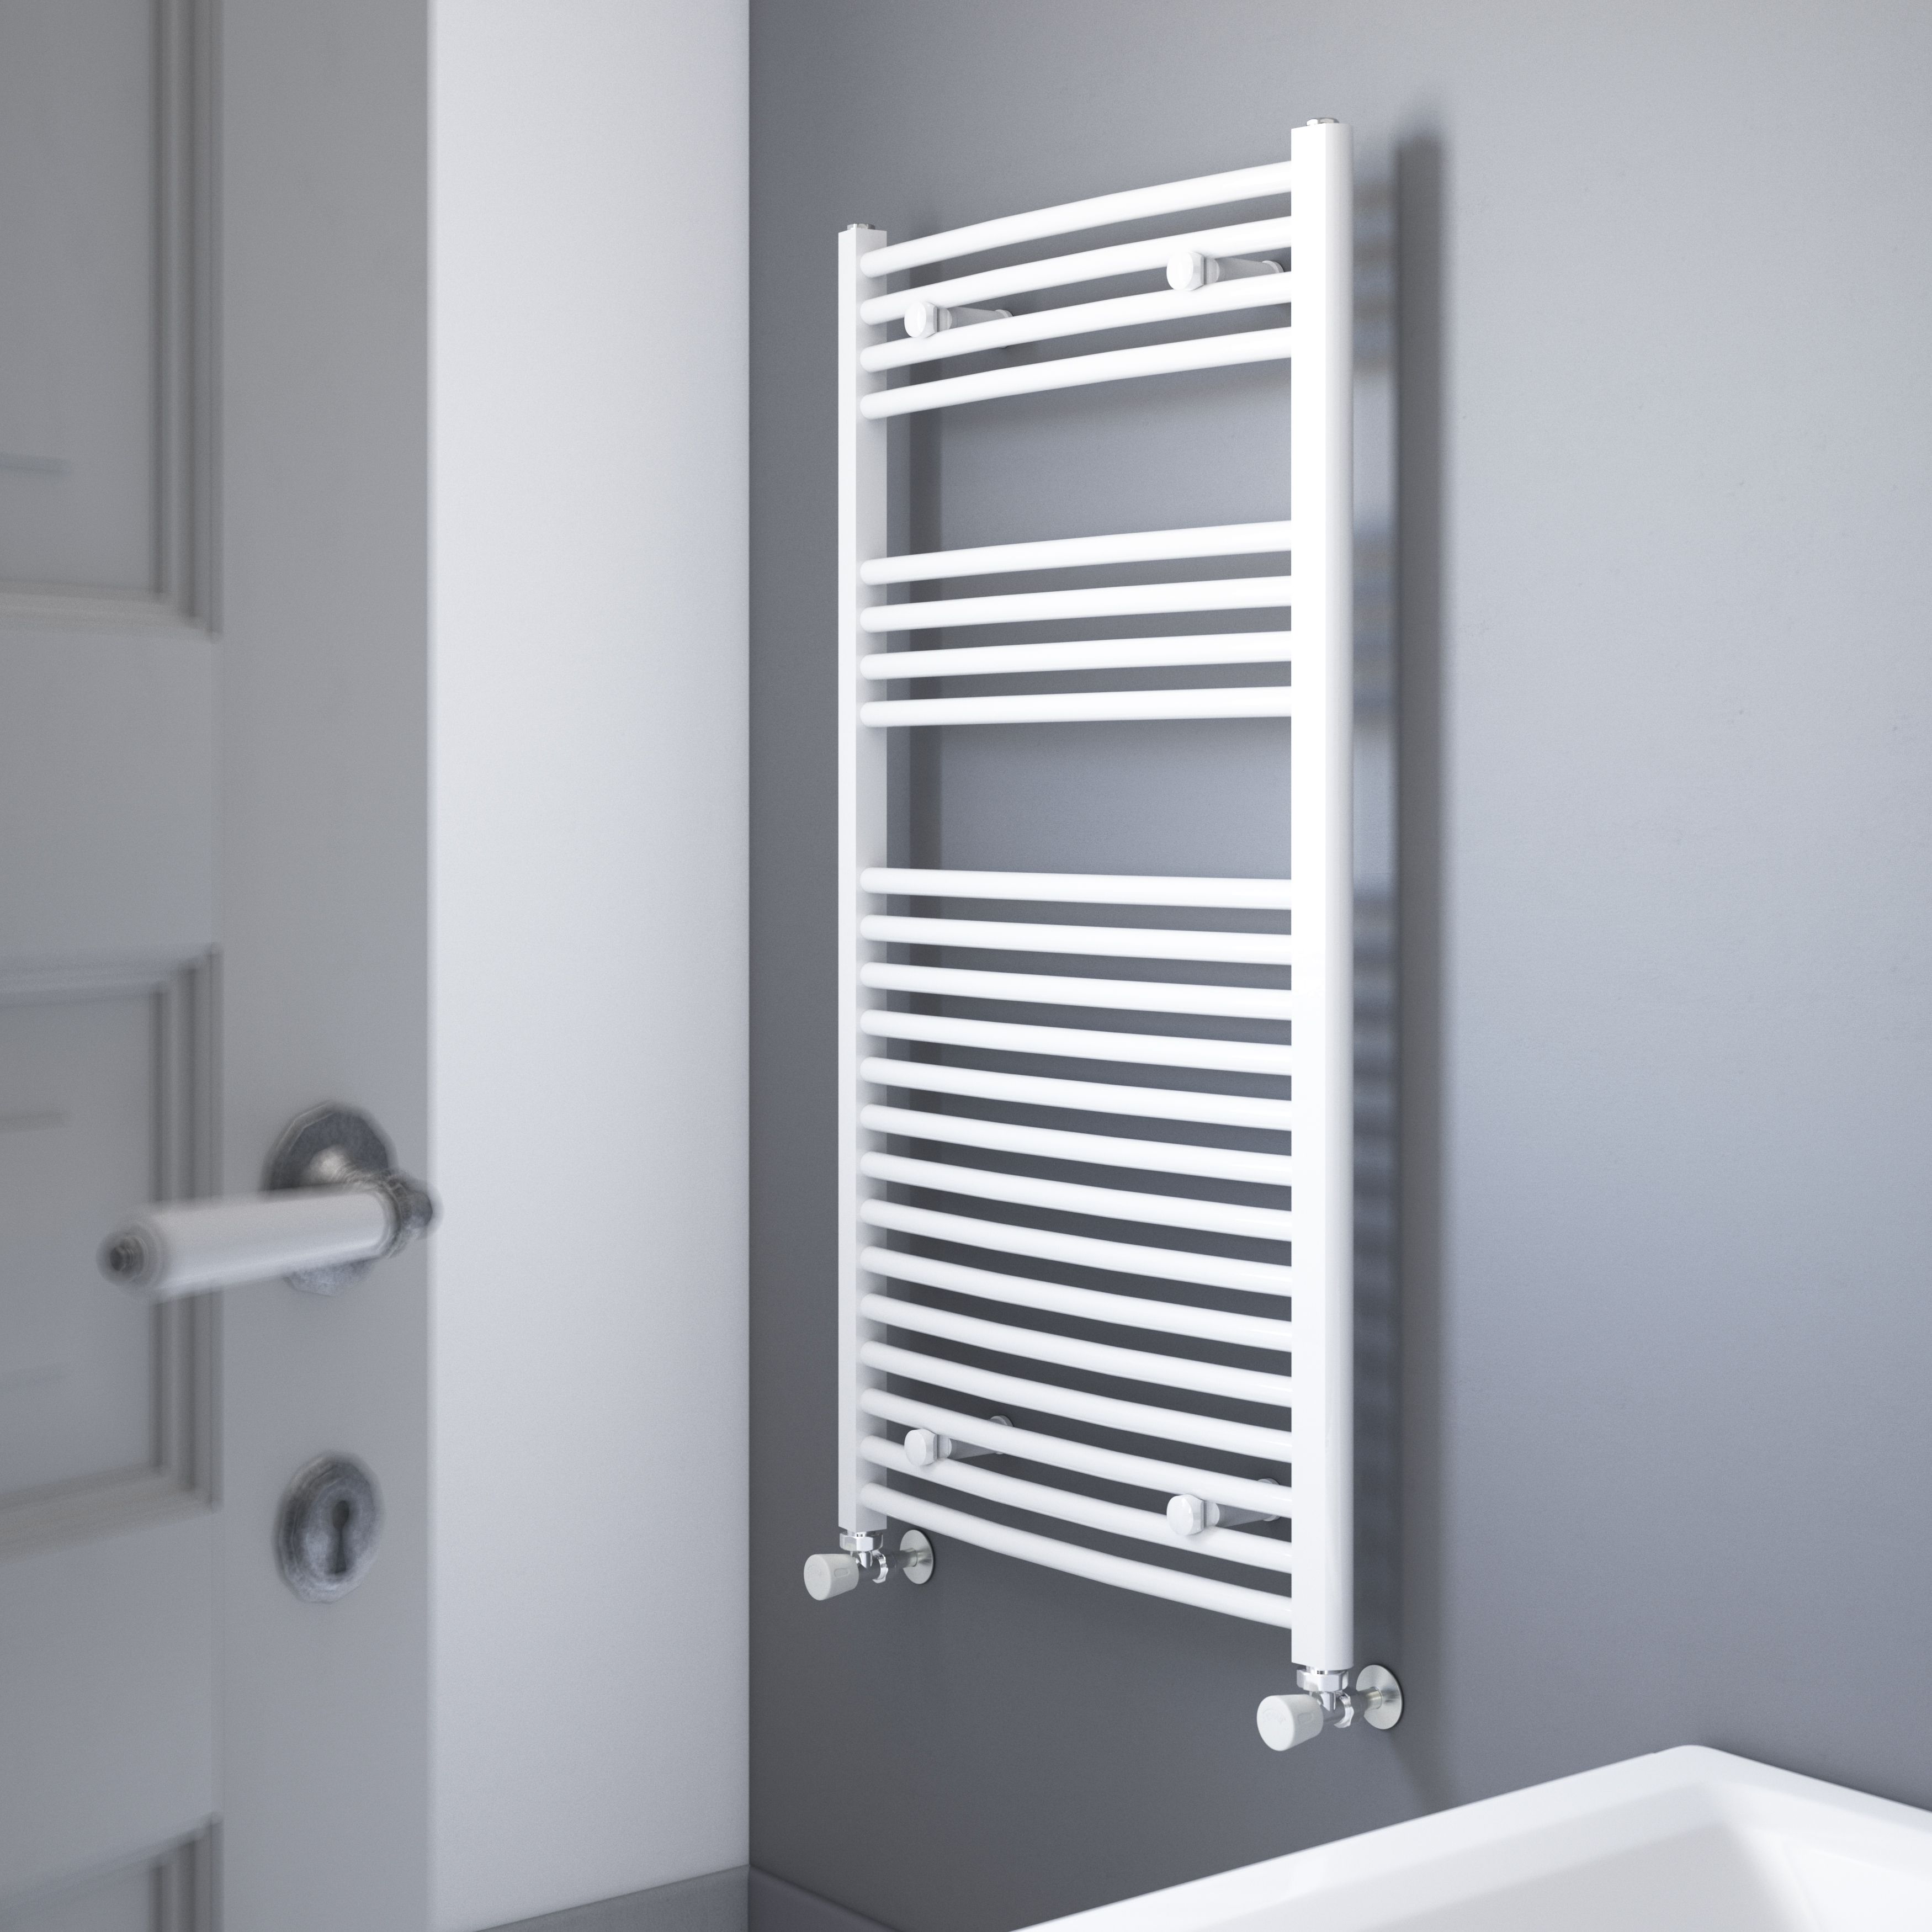 Flomasta, White Vertical Curved Towel radiator (W)600mm x (H)1100mm